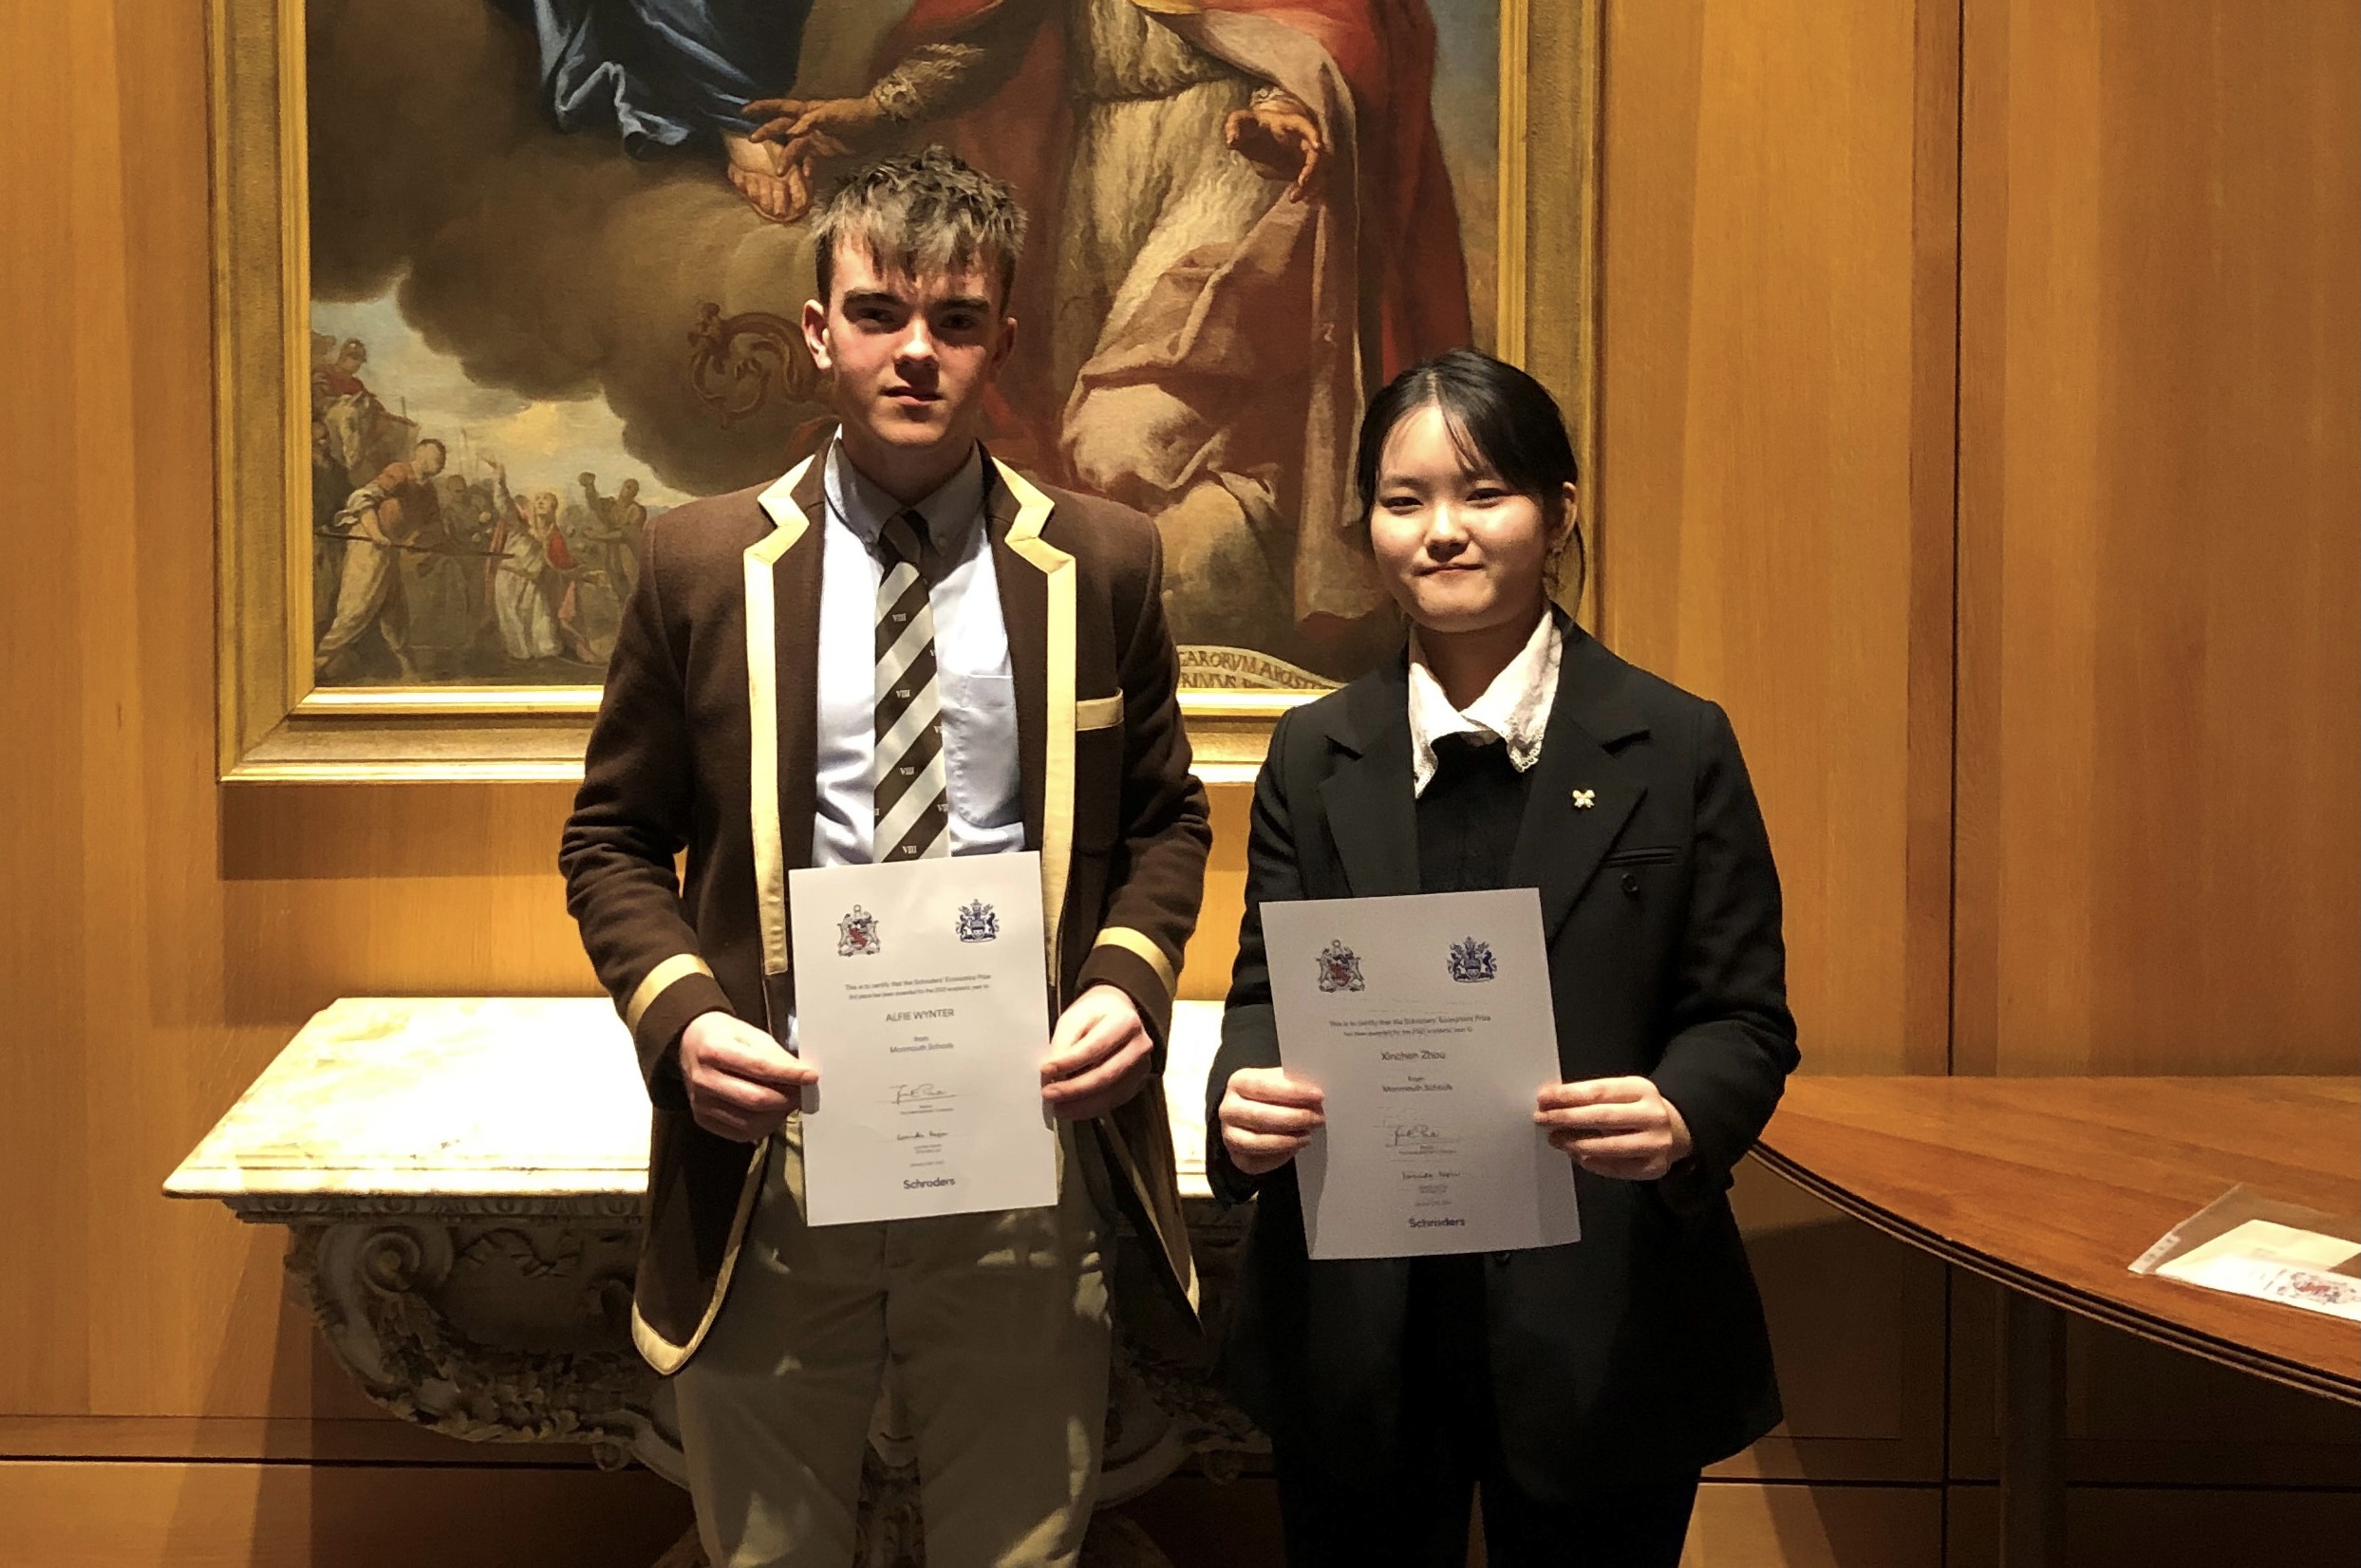 NEWS | A Herefordshire teenager has been recognised in a prestigious essay-writing competition